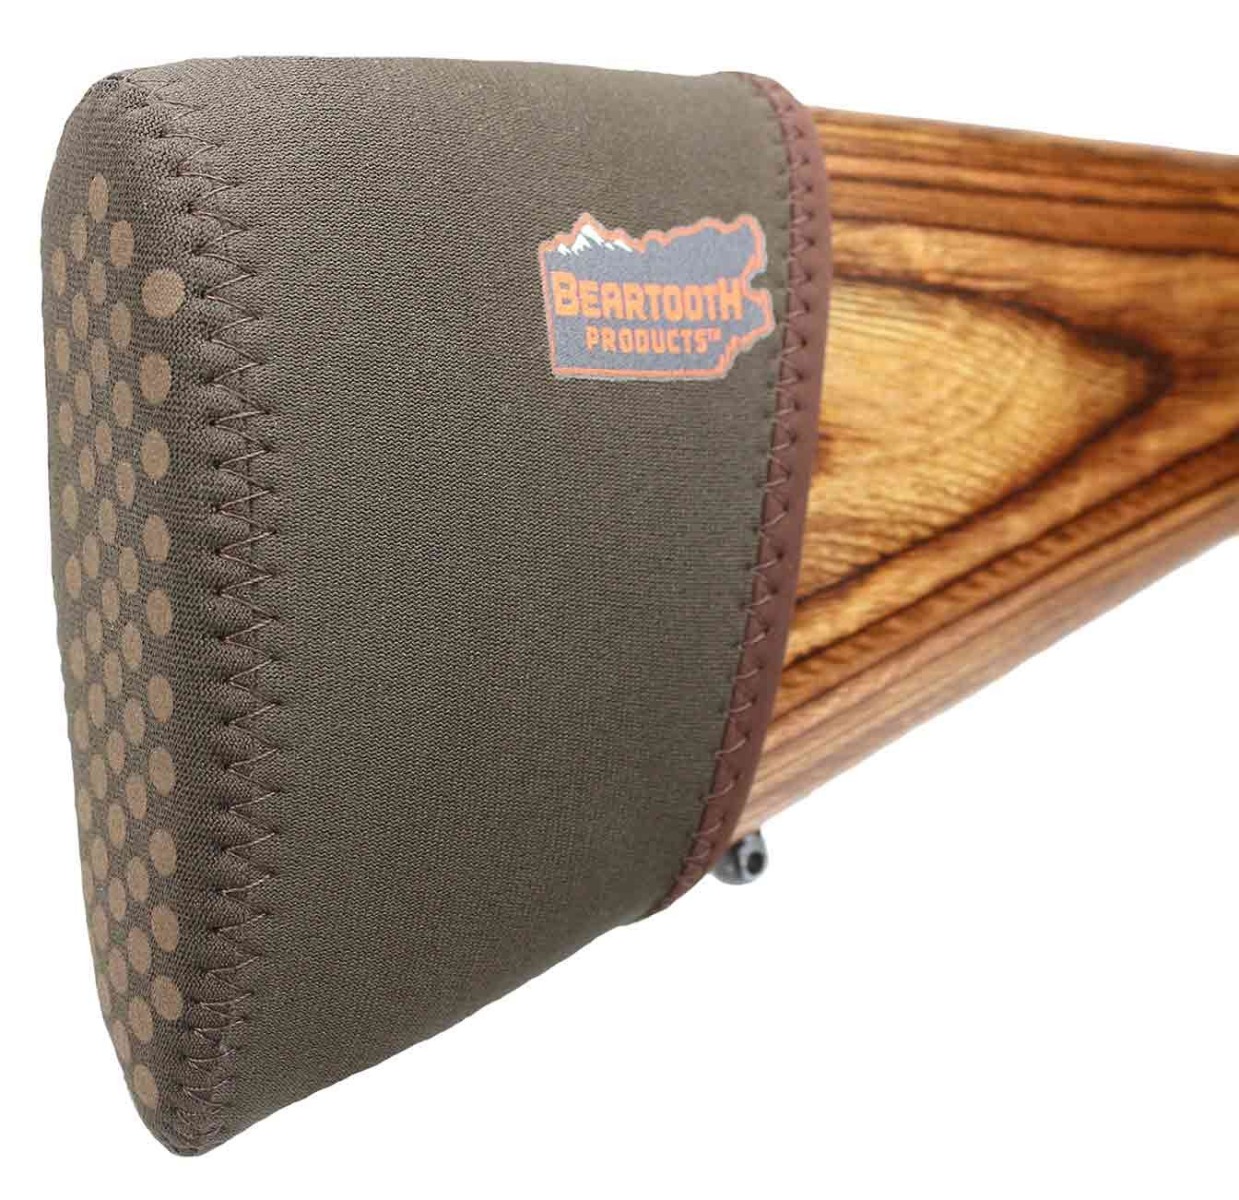 Beartooth Recoil Pad Kit With Foam Inserts To Increase The Stock Length Of Shotguns & Rifles